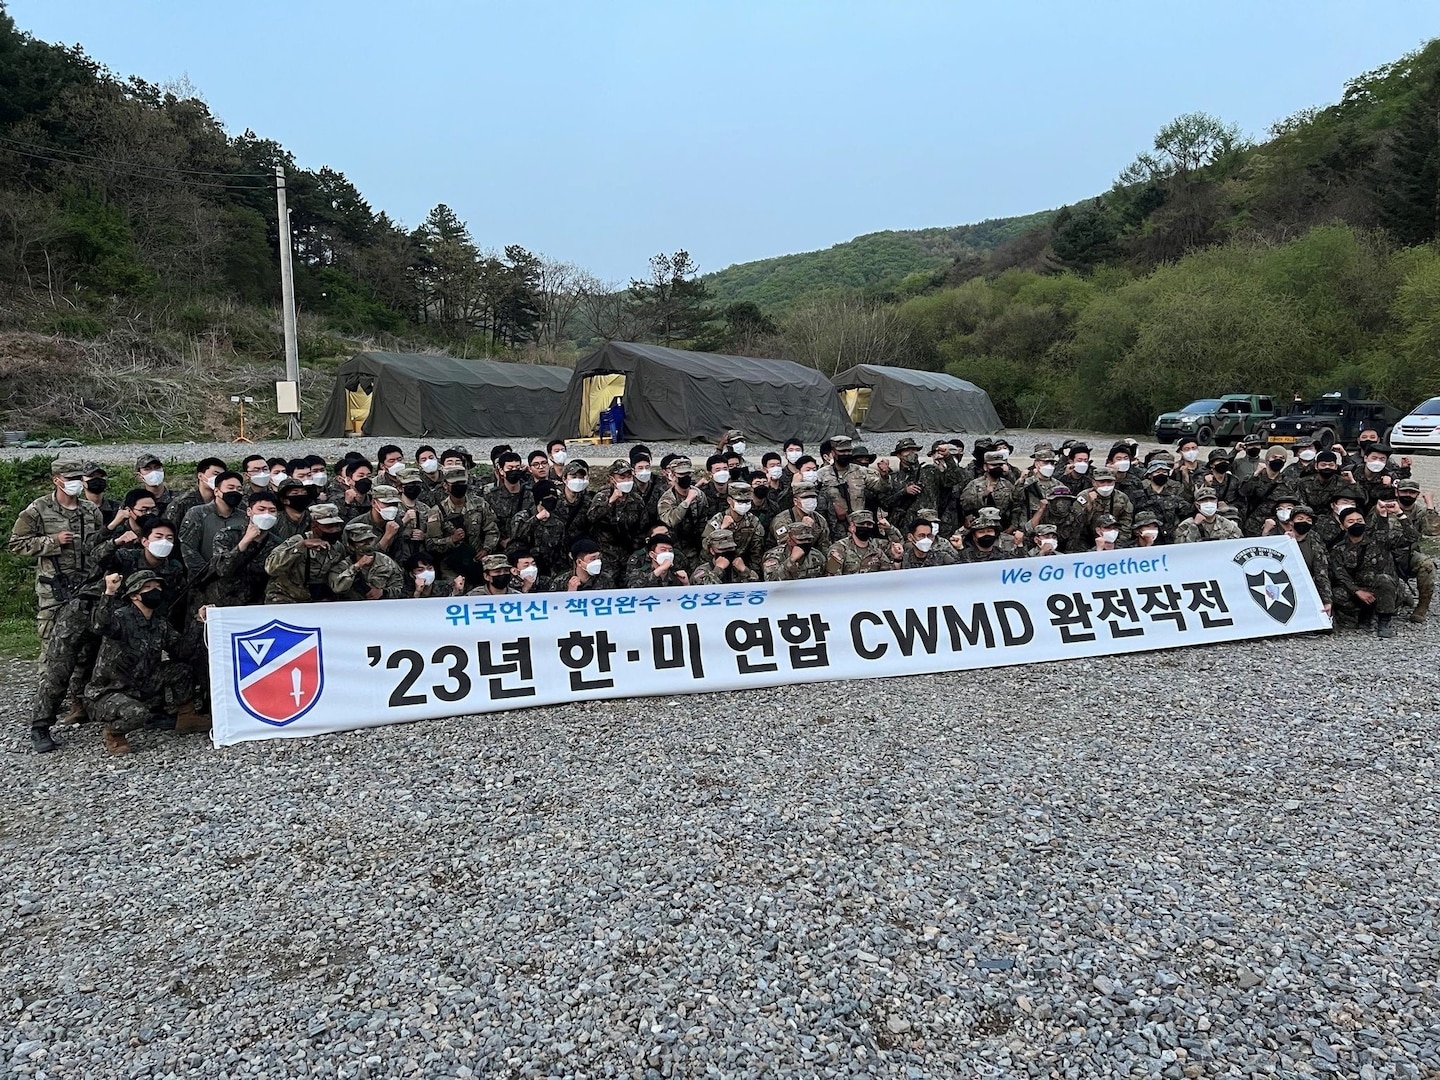 Soldiers from the U.S. Army’s 181st Chemical, Biological, Radiological, Nuclear (CBRN) Company (Hazardous Response) “Double Dragons” served alongside the 23rd CBRN Battalion, 2nd Infantry Division and Eighth Army during a nine-month rotational deployment to South Korea. The Double Dragons served with many American and South Korean units during the deployment, including the Republic of Korea's 17th Infantry Division.